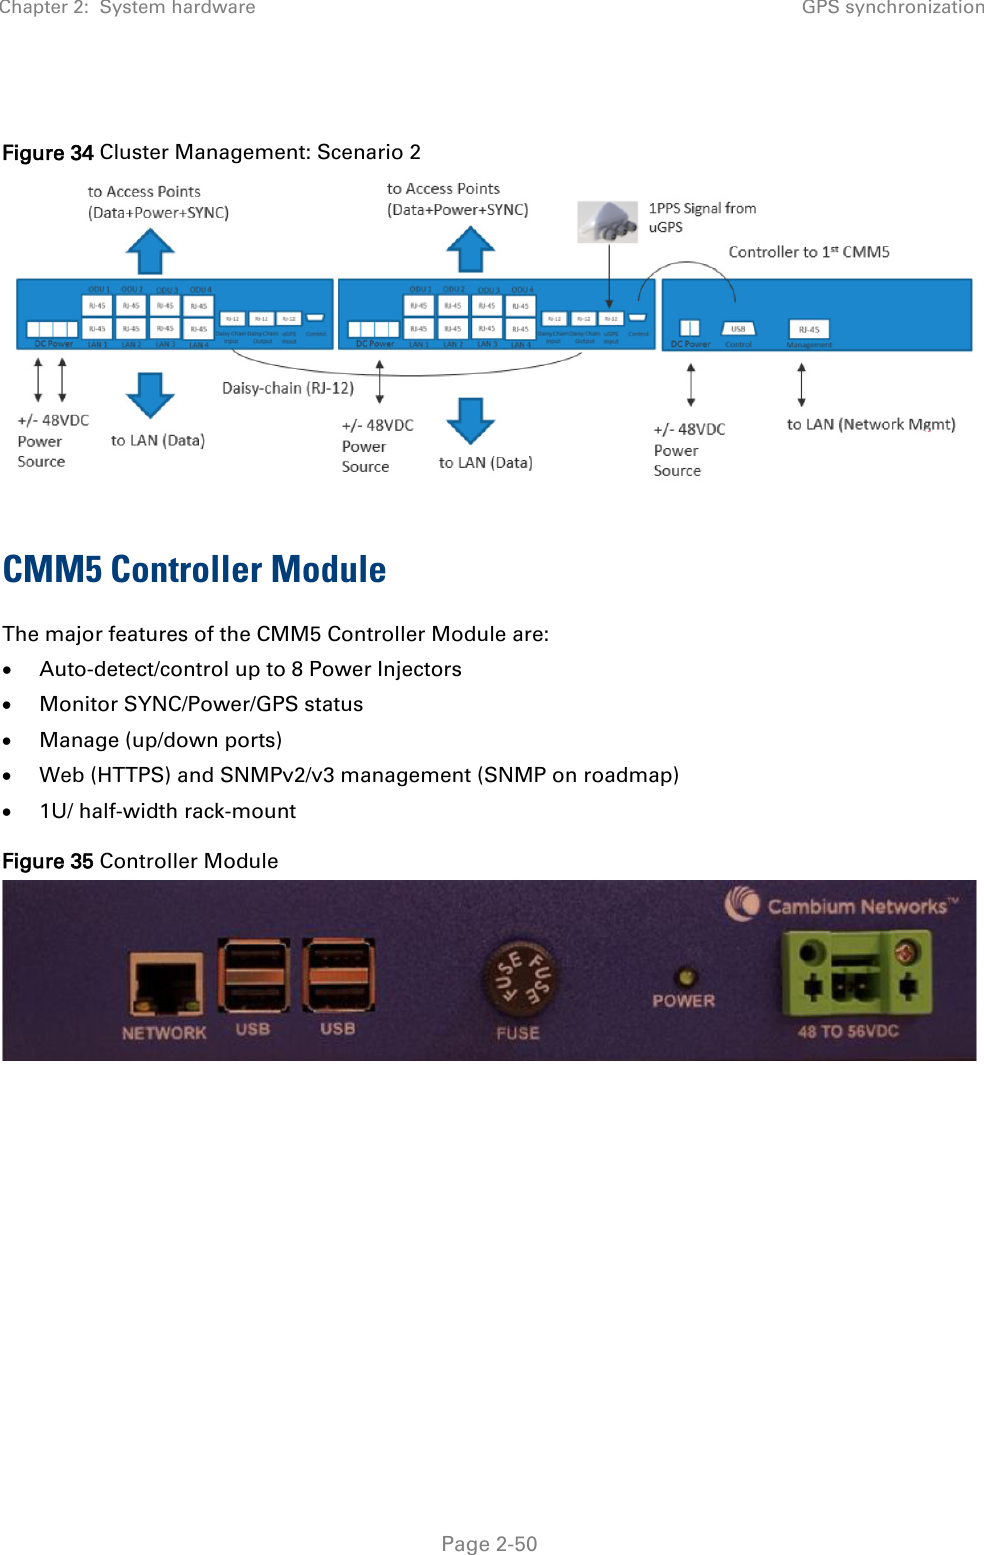 Chapter 2:  System hardware GPS synchronization   Page 2-50  Figure 34 Cluster Management: Scenario 2  CMM5 Controller Module The major features of the CMM5 Controller Module are: • Auto-detect/control up to 8 Power Injectors • Monitor SYNC/Power/GPS status • Manage (up/down ports) • Web (HTTPS) and SNMPv2/v3 management (SNMP on roadmap) • 1U/ half-width rack-mount Figure 35 Controller Module    